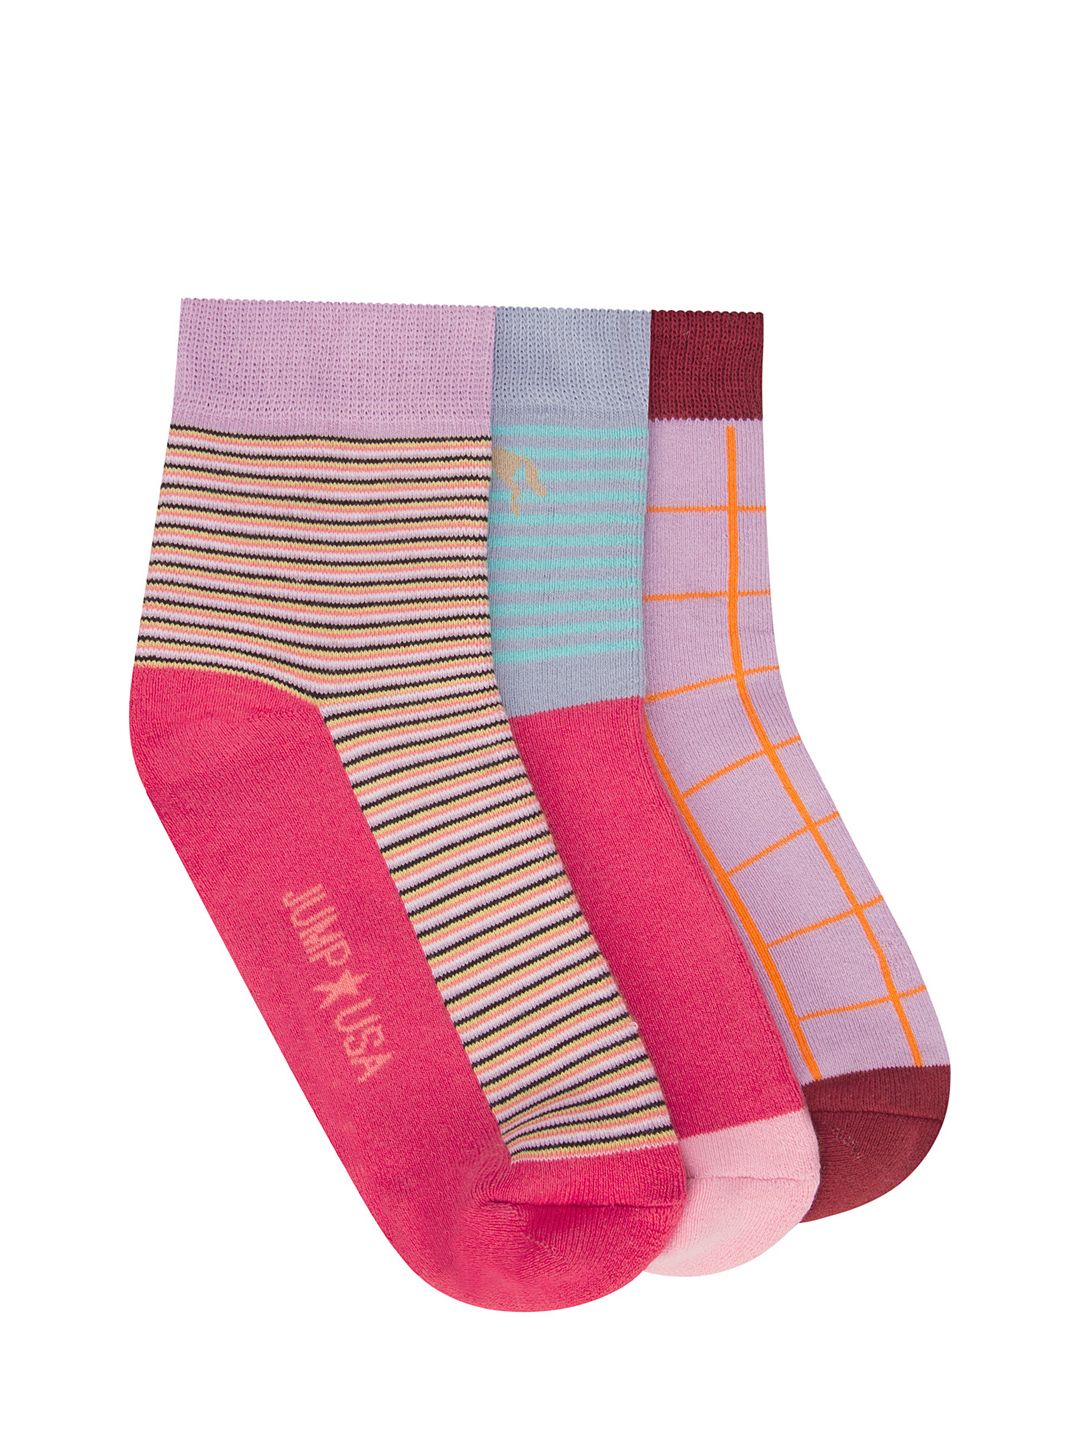 JUMP USA Women Pack of 3 Ankle Length Socks Price in India